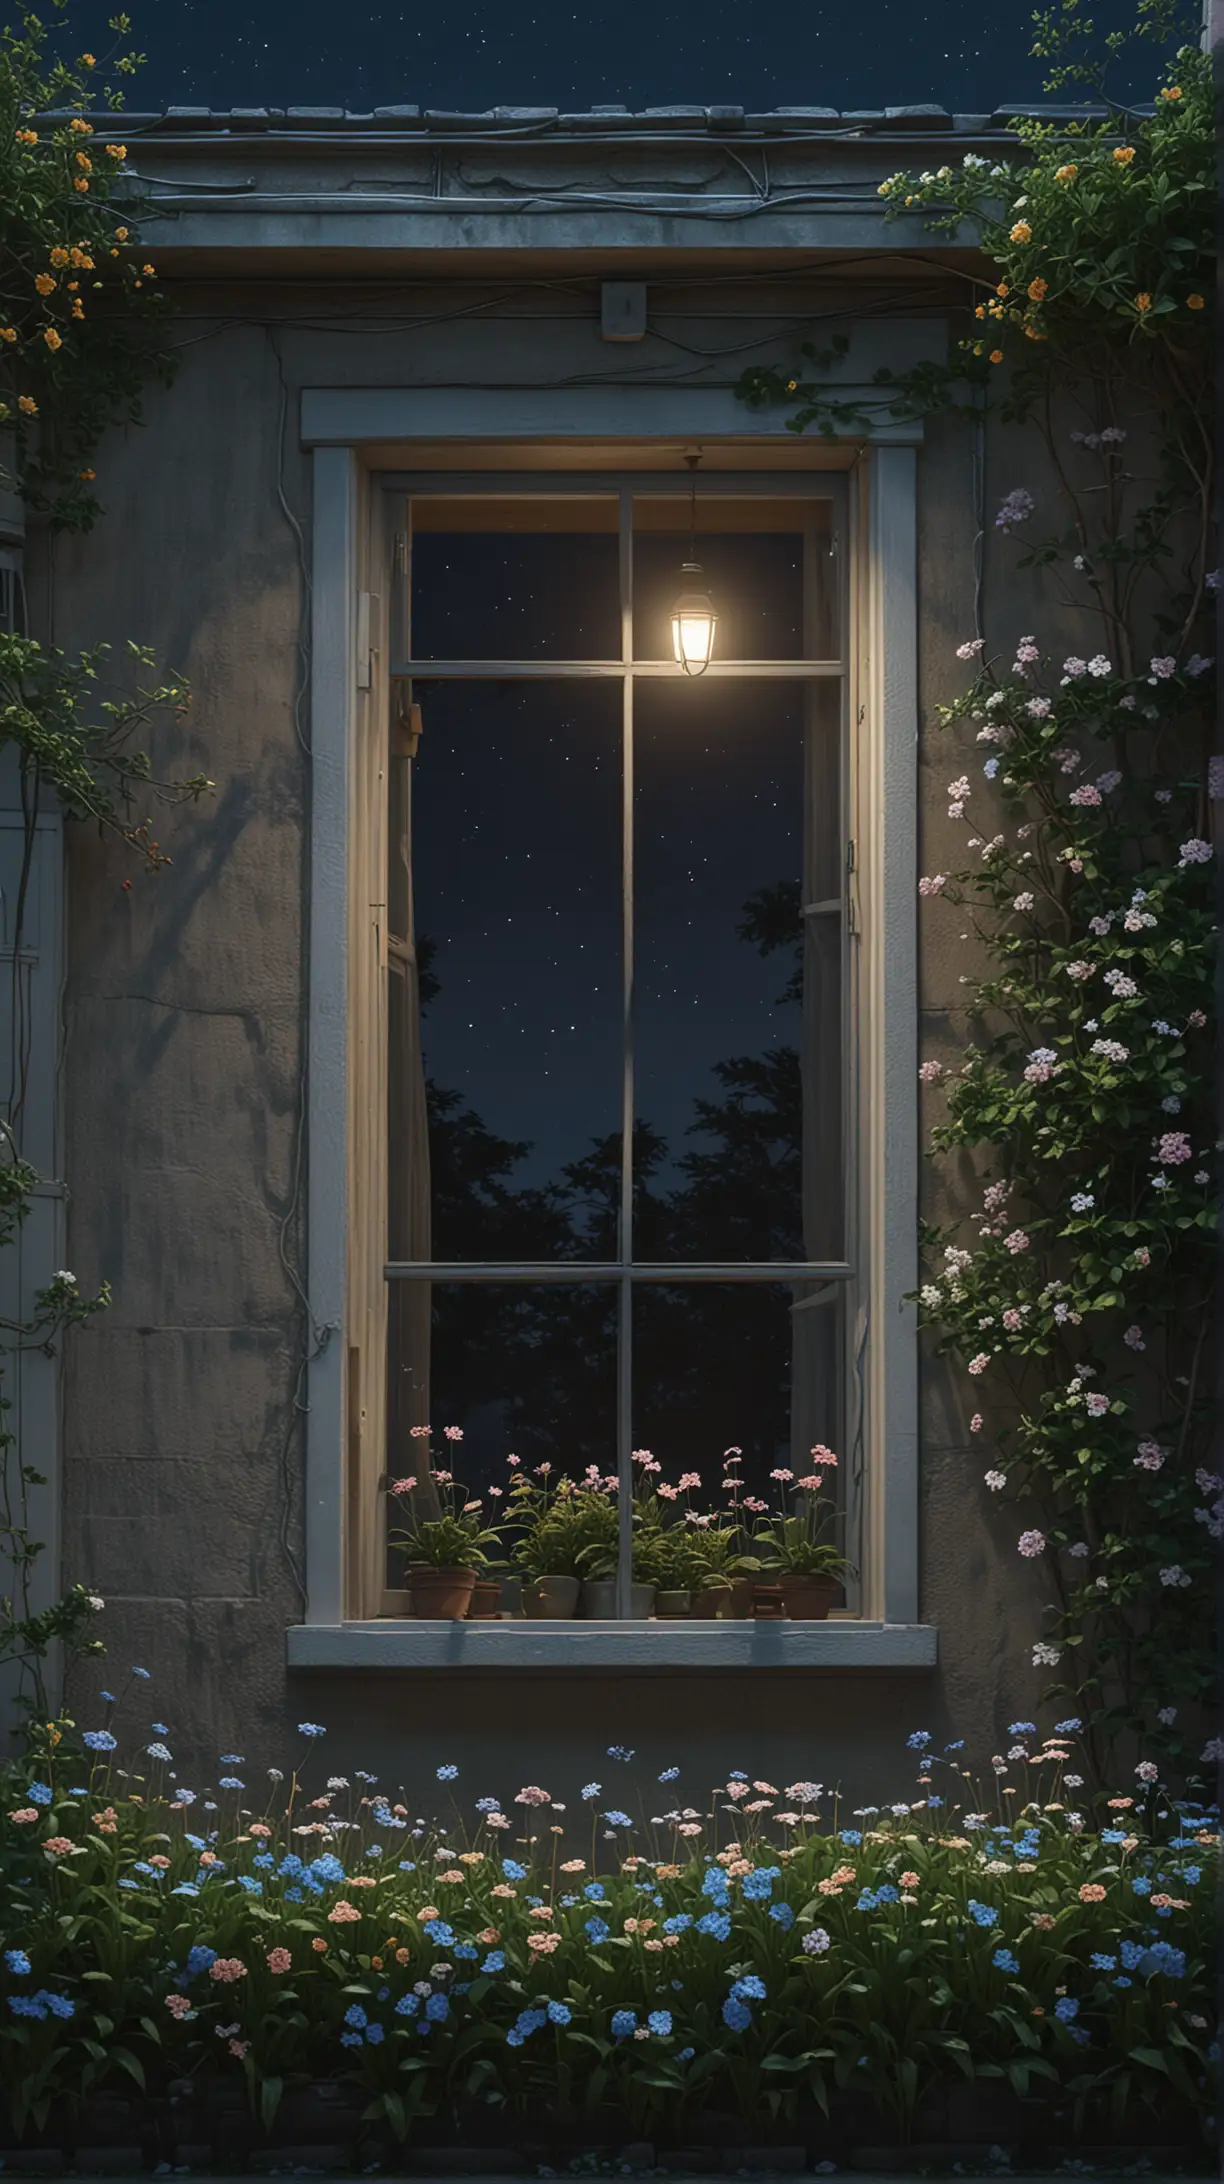 view from front flower. bush up old house countryside greek style with big window and lamp ,Dark night sky, bush and variant flowers around,8k render, illustration, ultra detailed, realistic, 3Drender, acrylic palette colors, trending pixiv fanbox, makoto shinkai style, ghibli style, best quality, best composition, stable diffusion, 